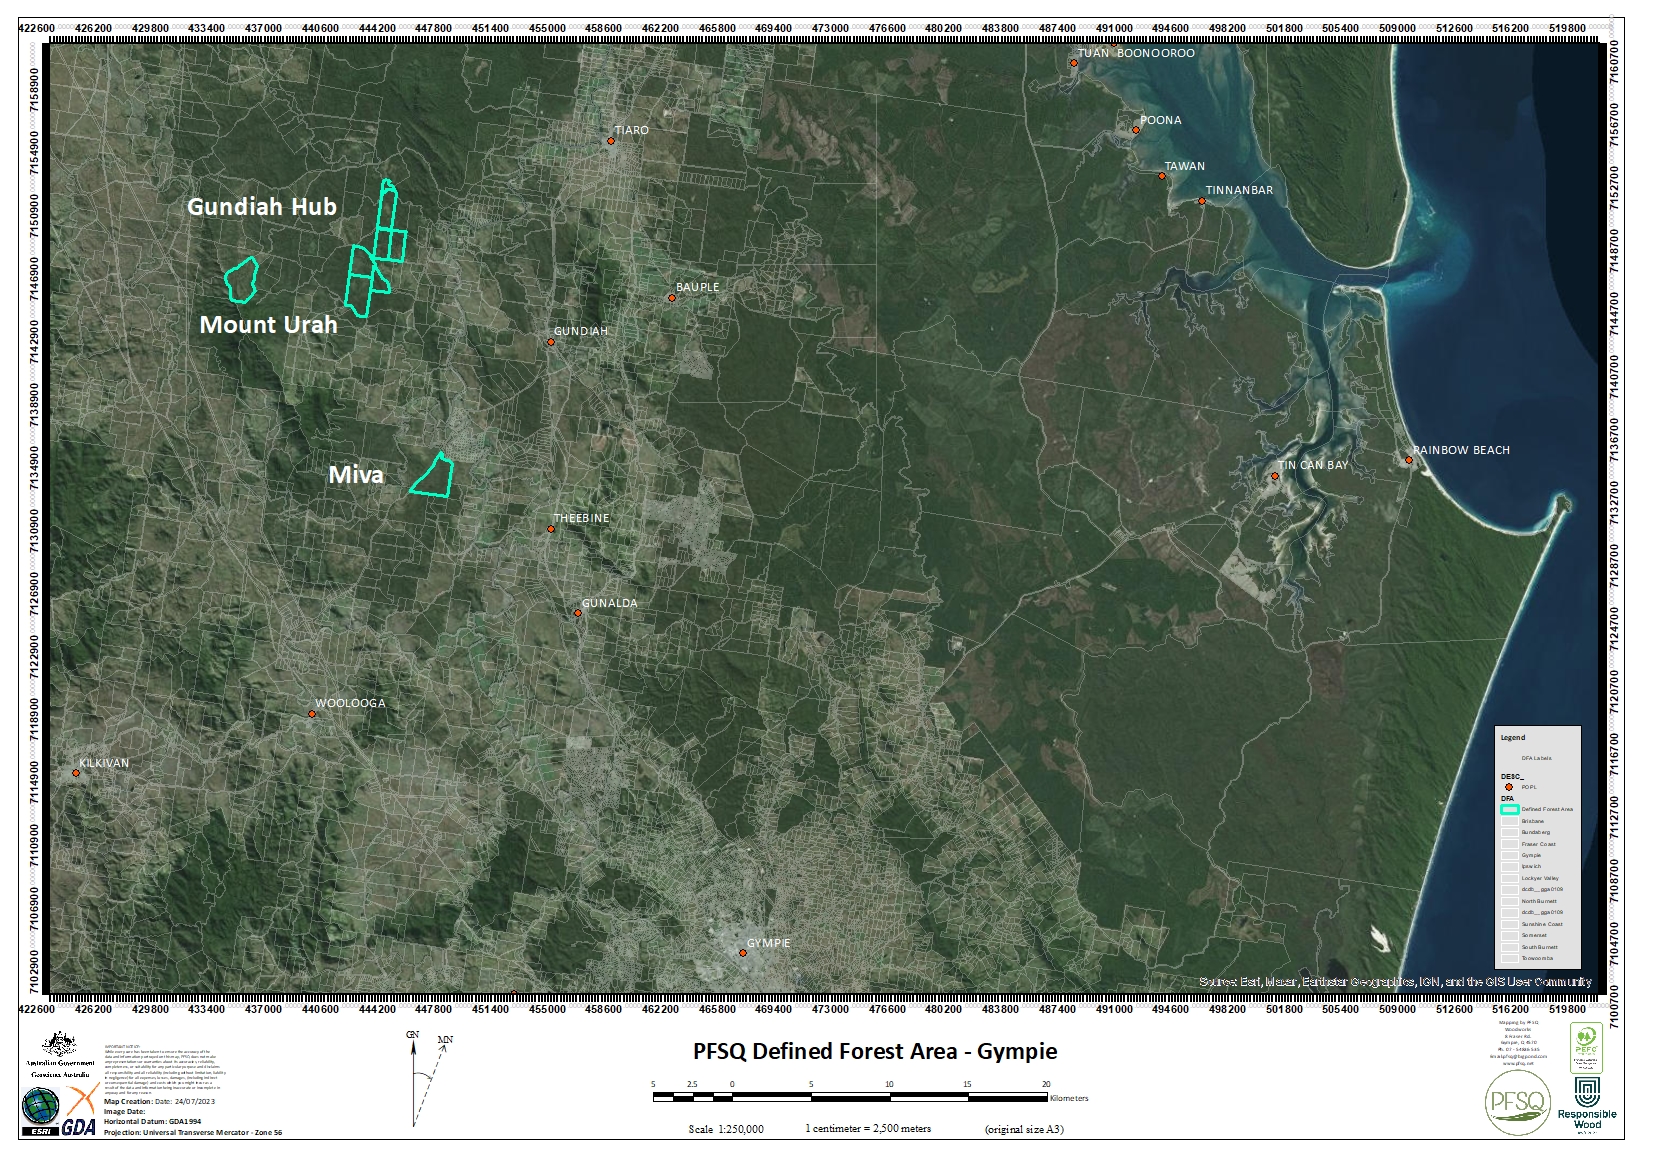 Defined Forest Area Gympie